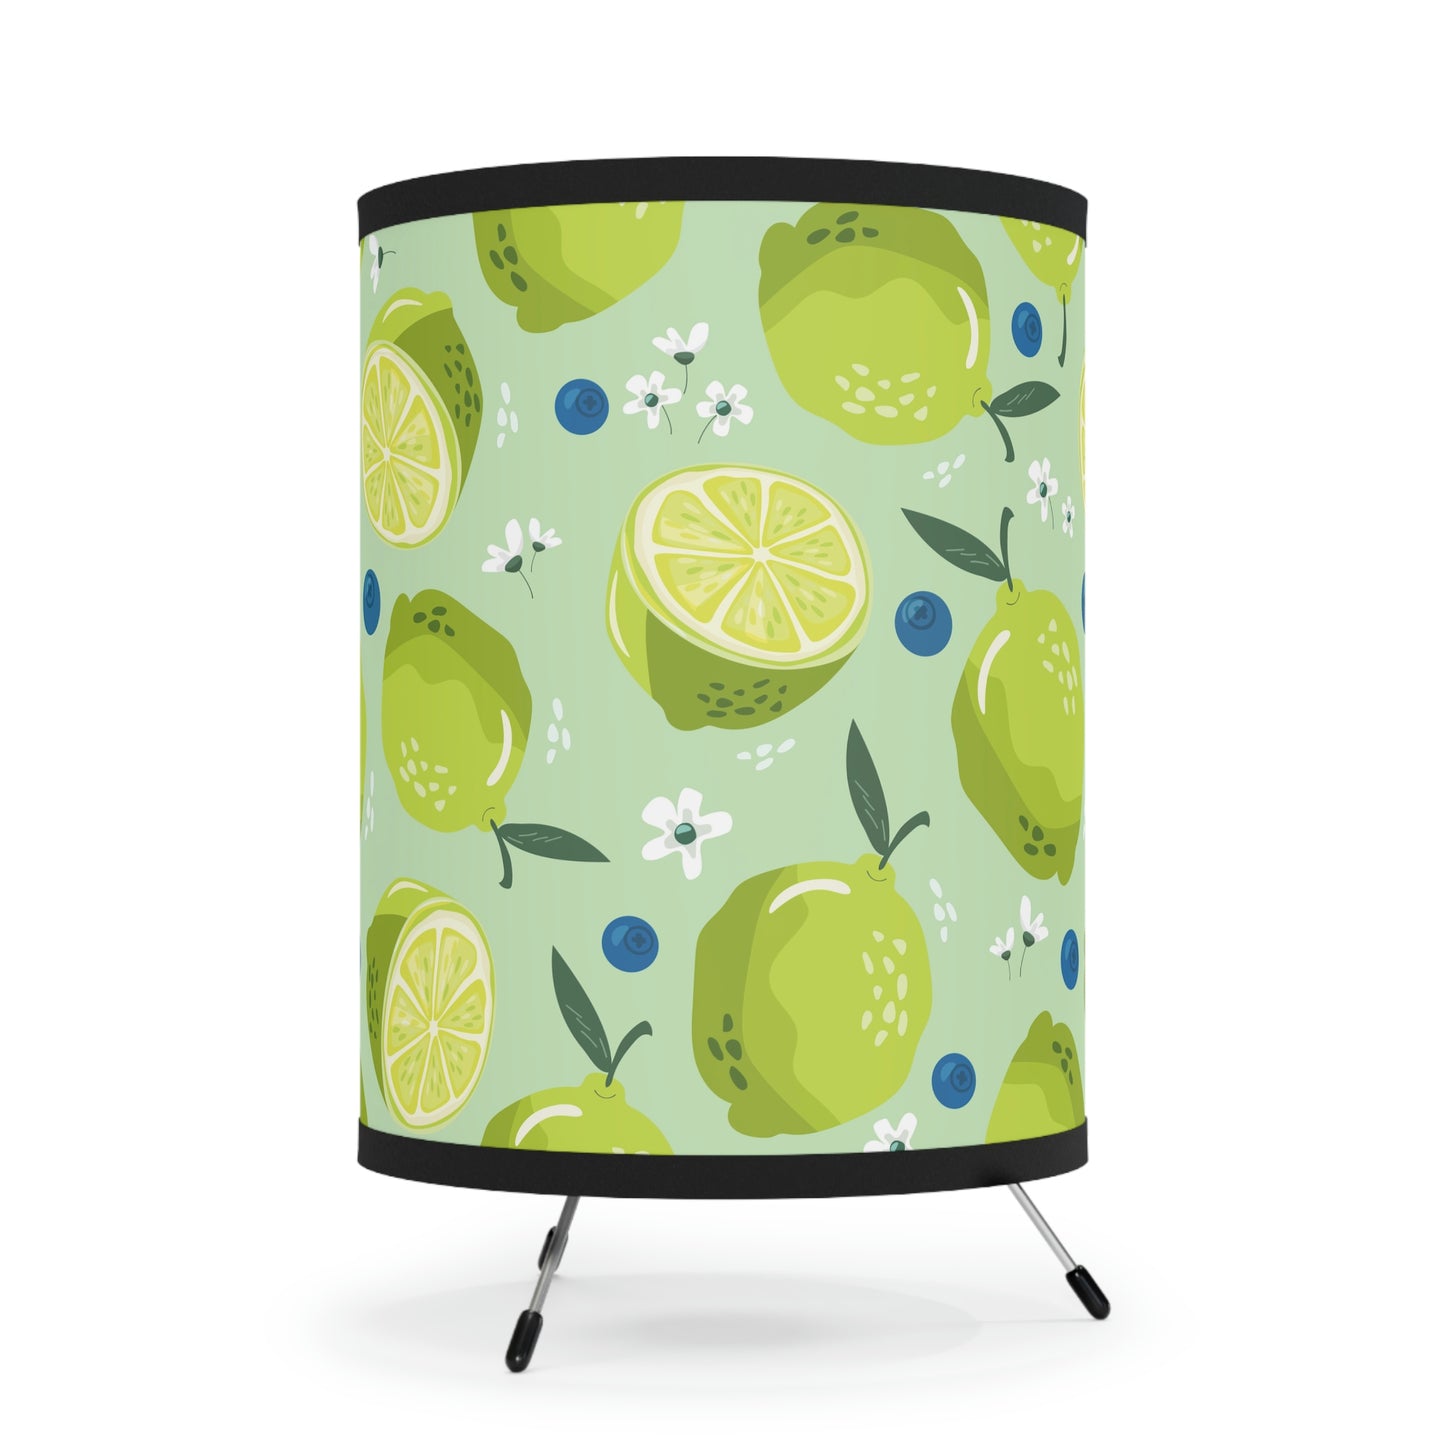 Limes and Blueberries Tripod Lamp with High-Res Printed Shade, US\CA plug